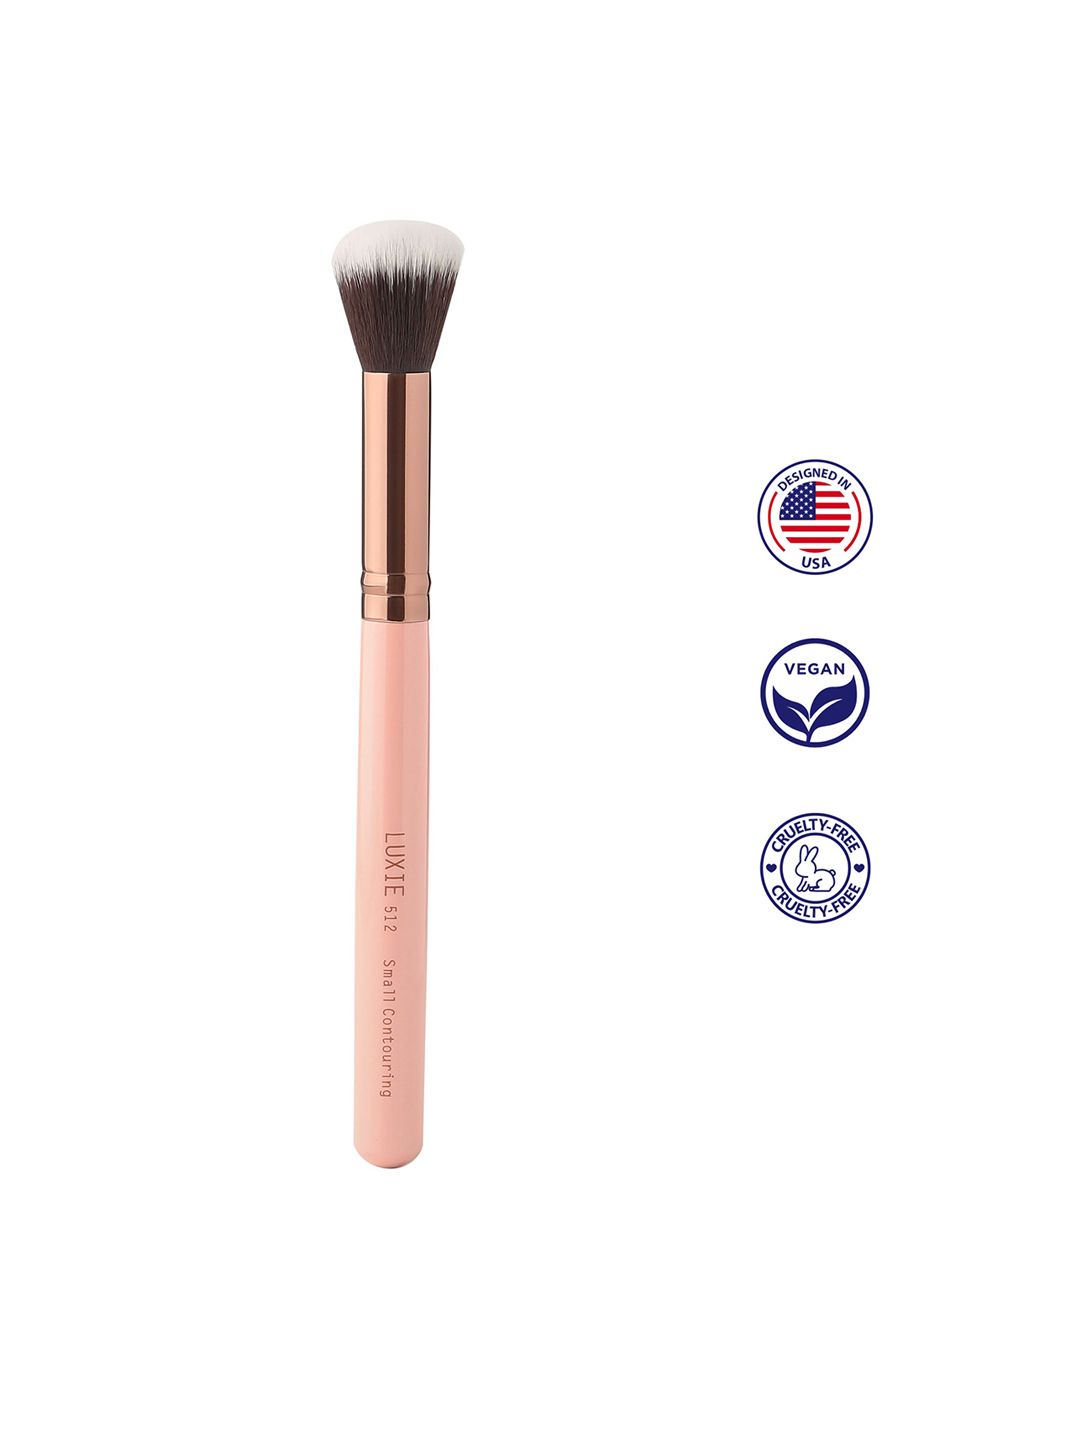 LUXIE Rose Gold Small Contouring Brush - 512 Price in India